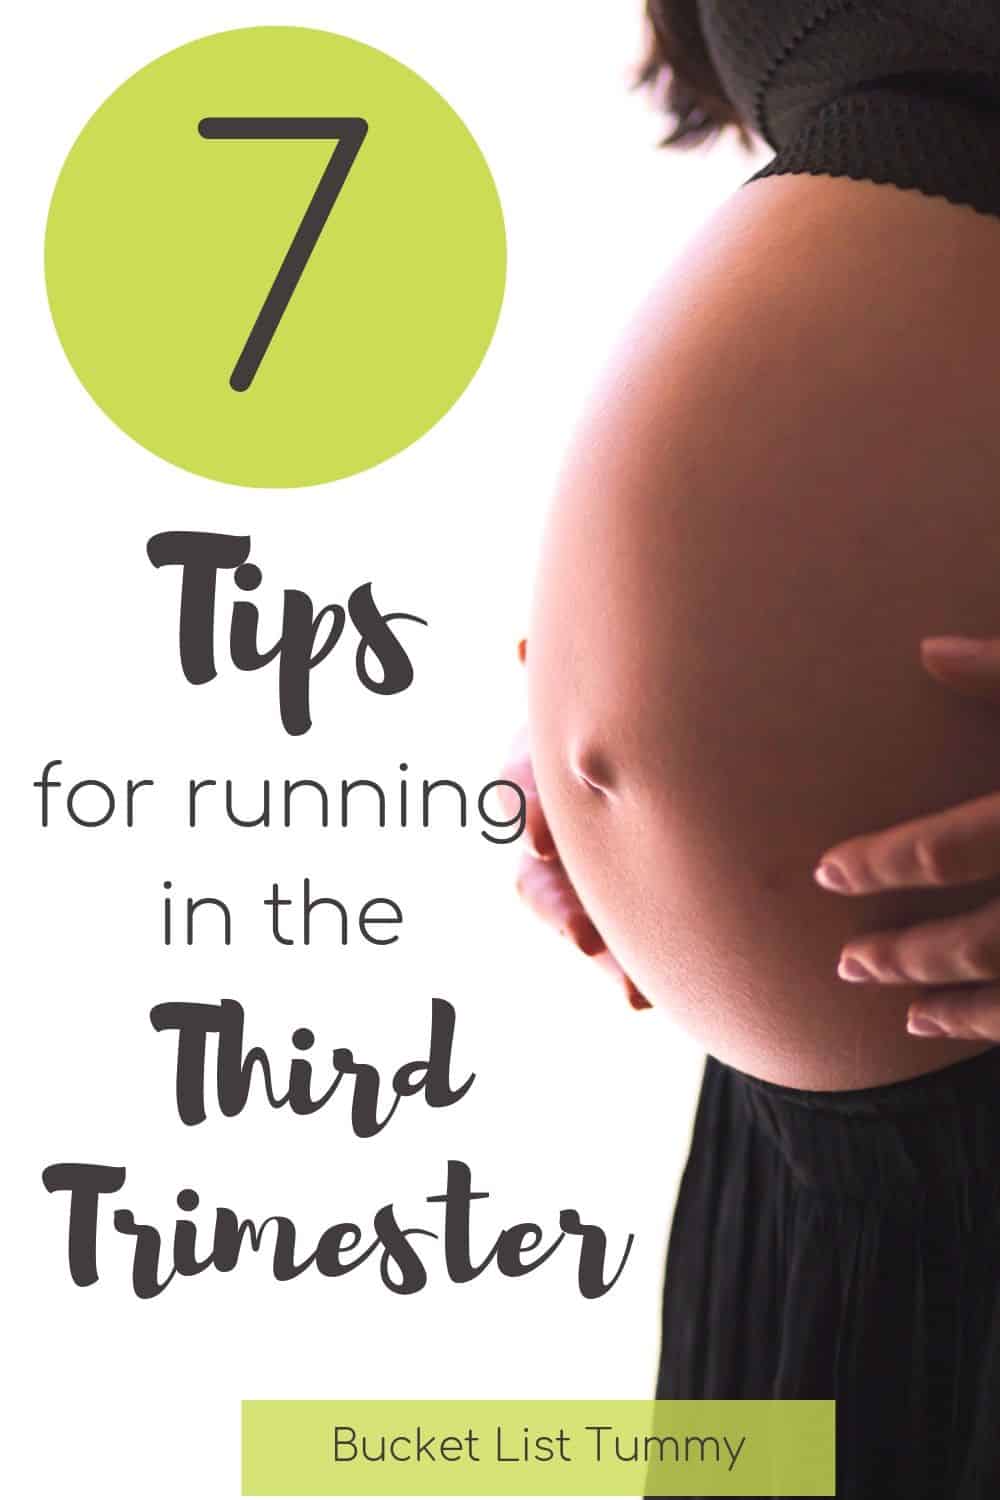 Running in the Third Trimester: My Top Tips